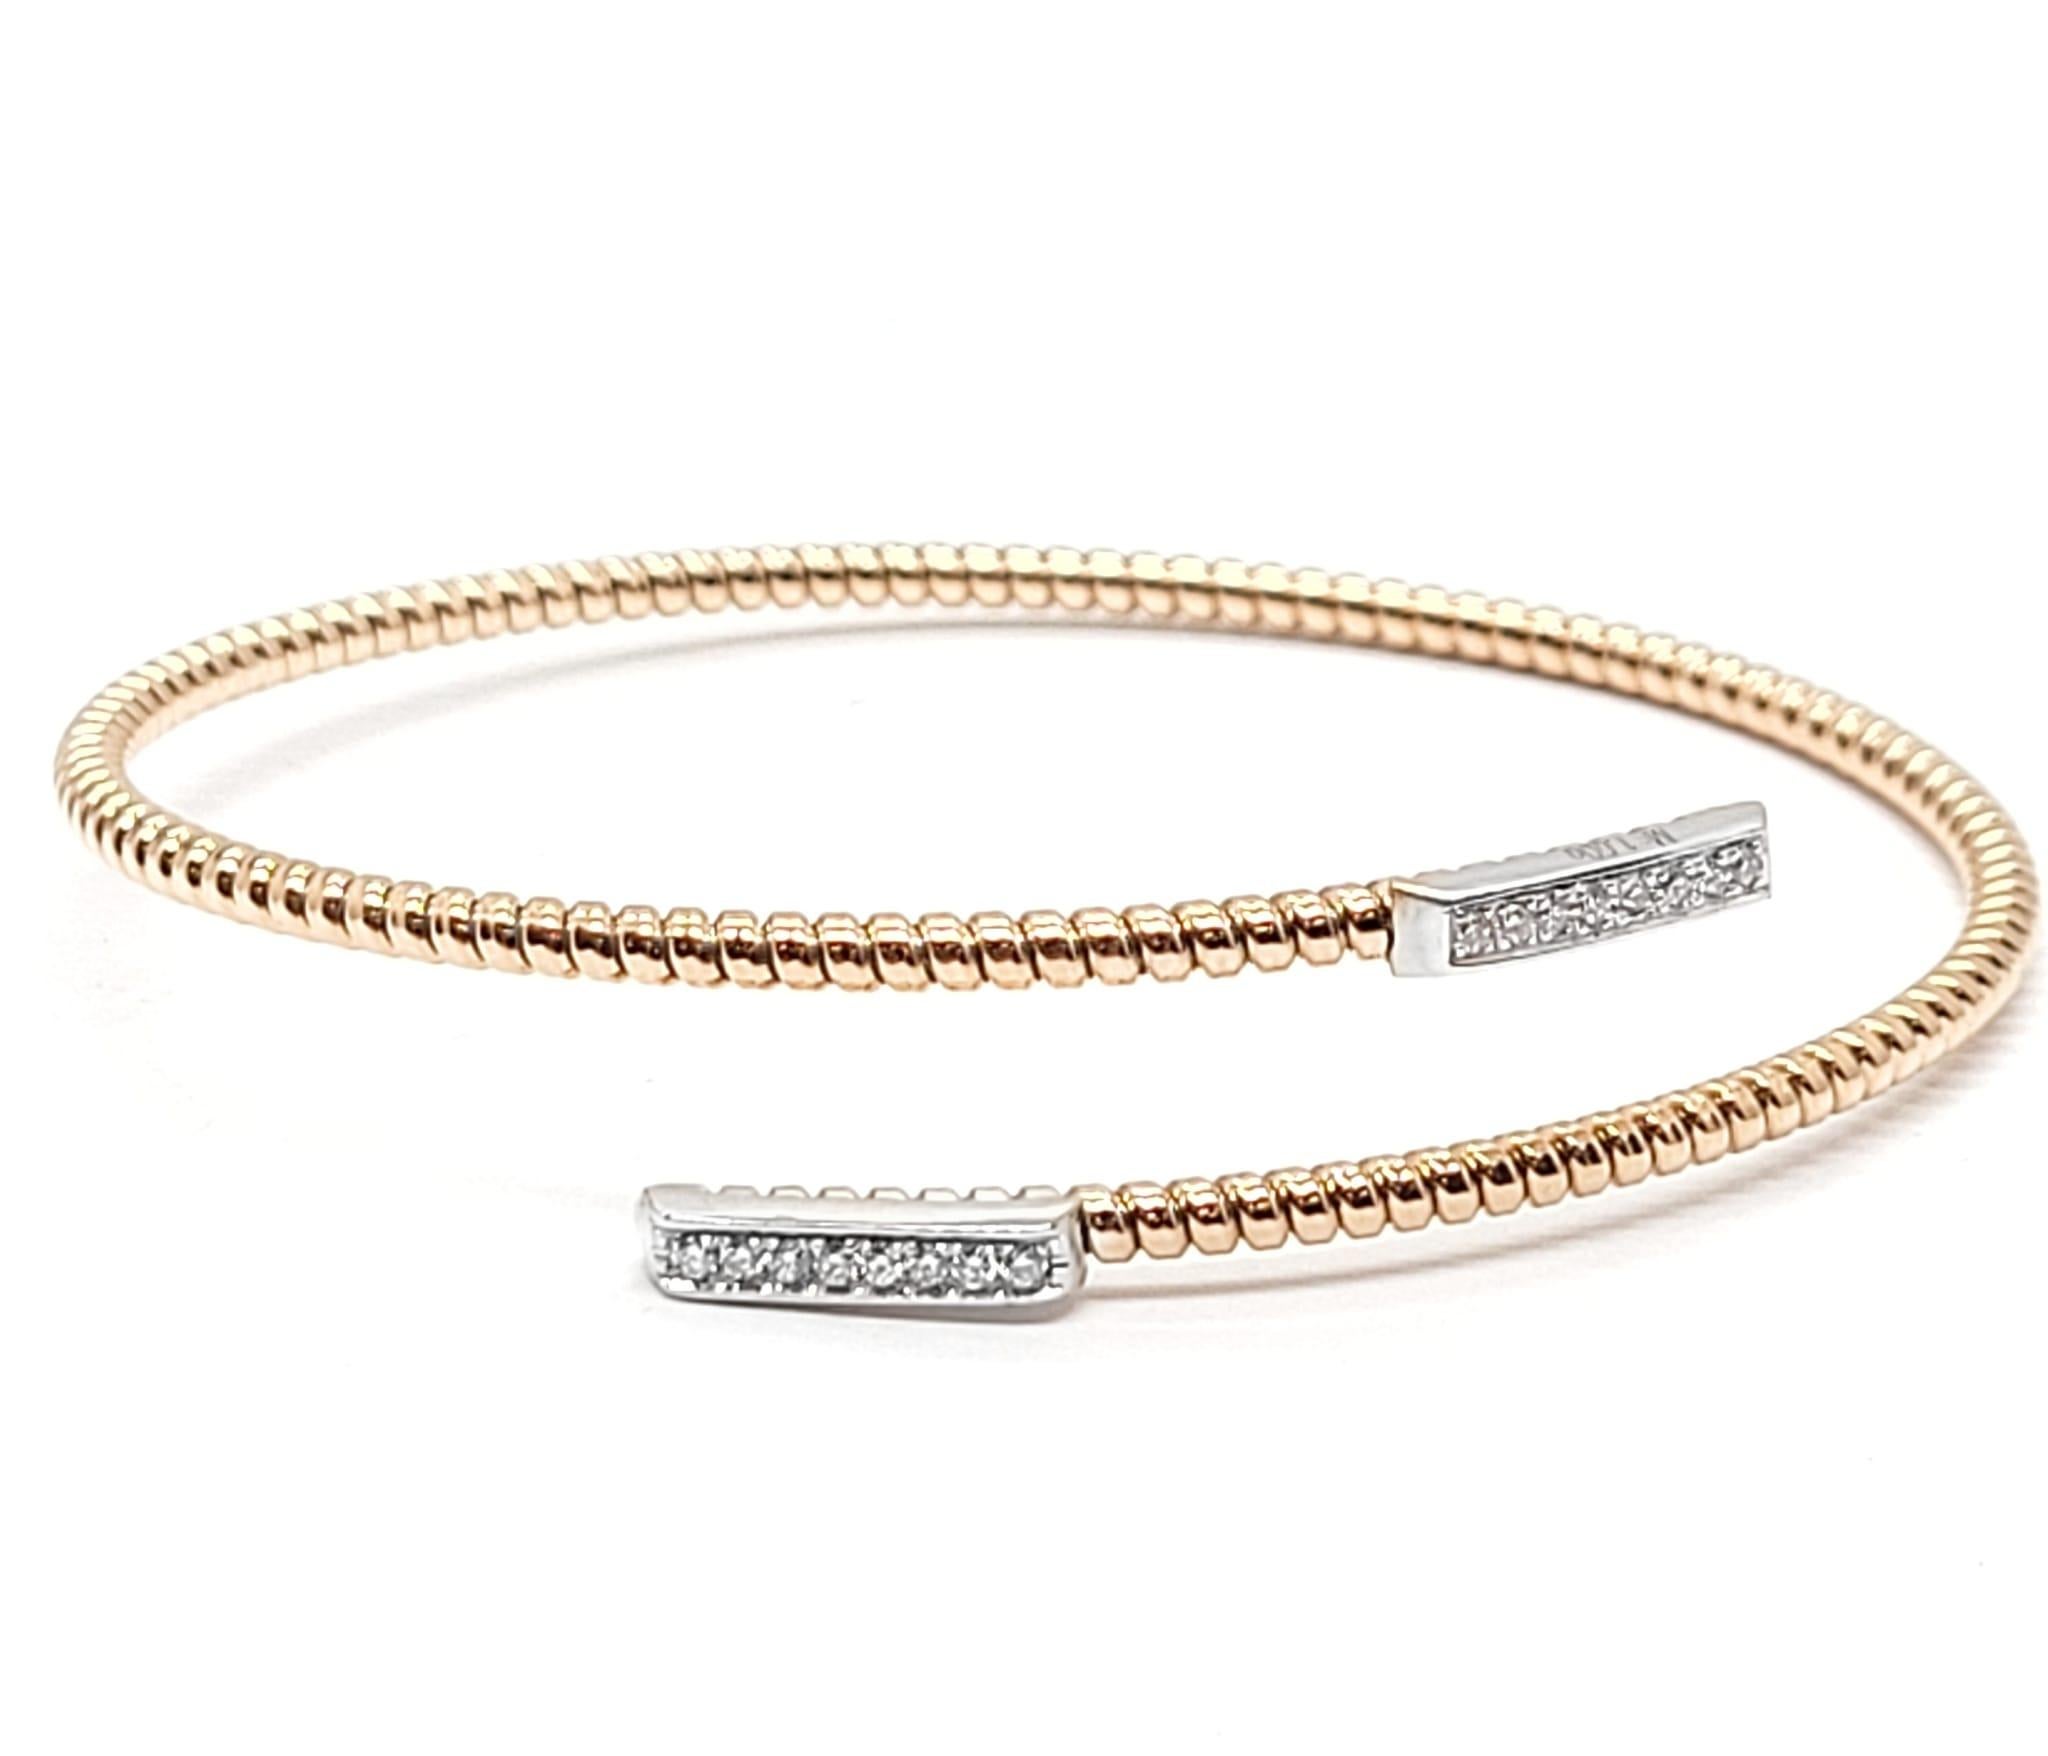 Andreoli Diamond Bracelet set in Rose Gold

This Flexible Bracelet Features :

0.13 ct round diamonds 
4.20 g of 18K Gold 
Made In Italy 